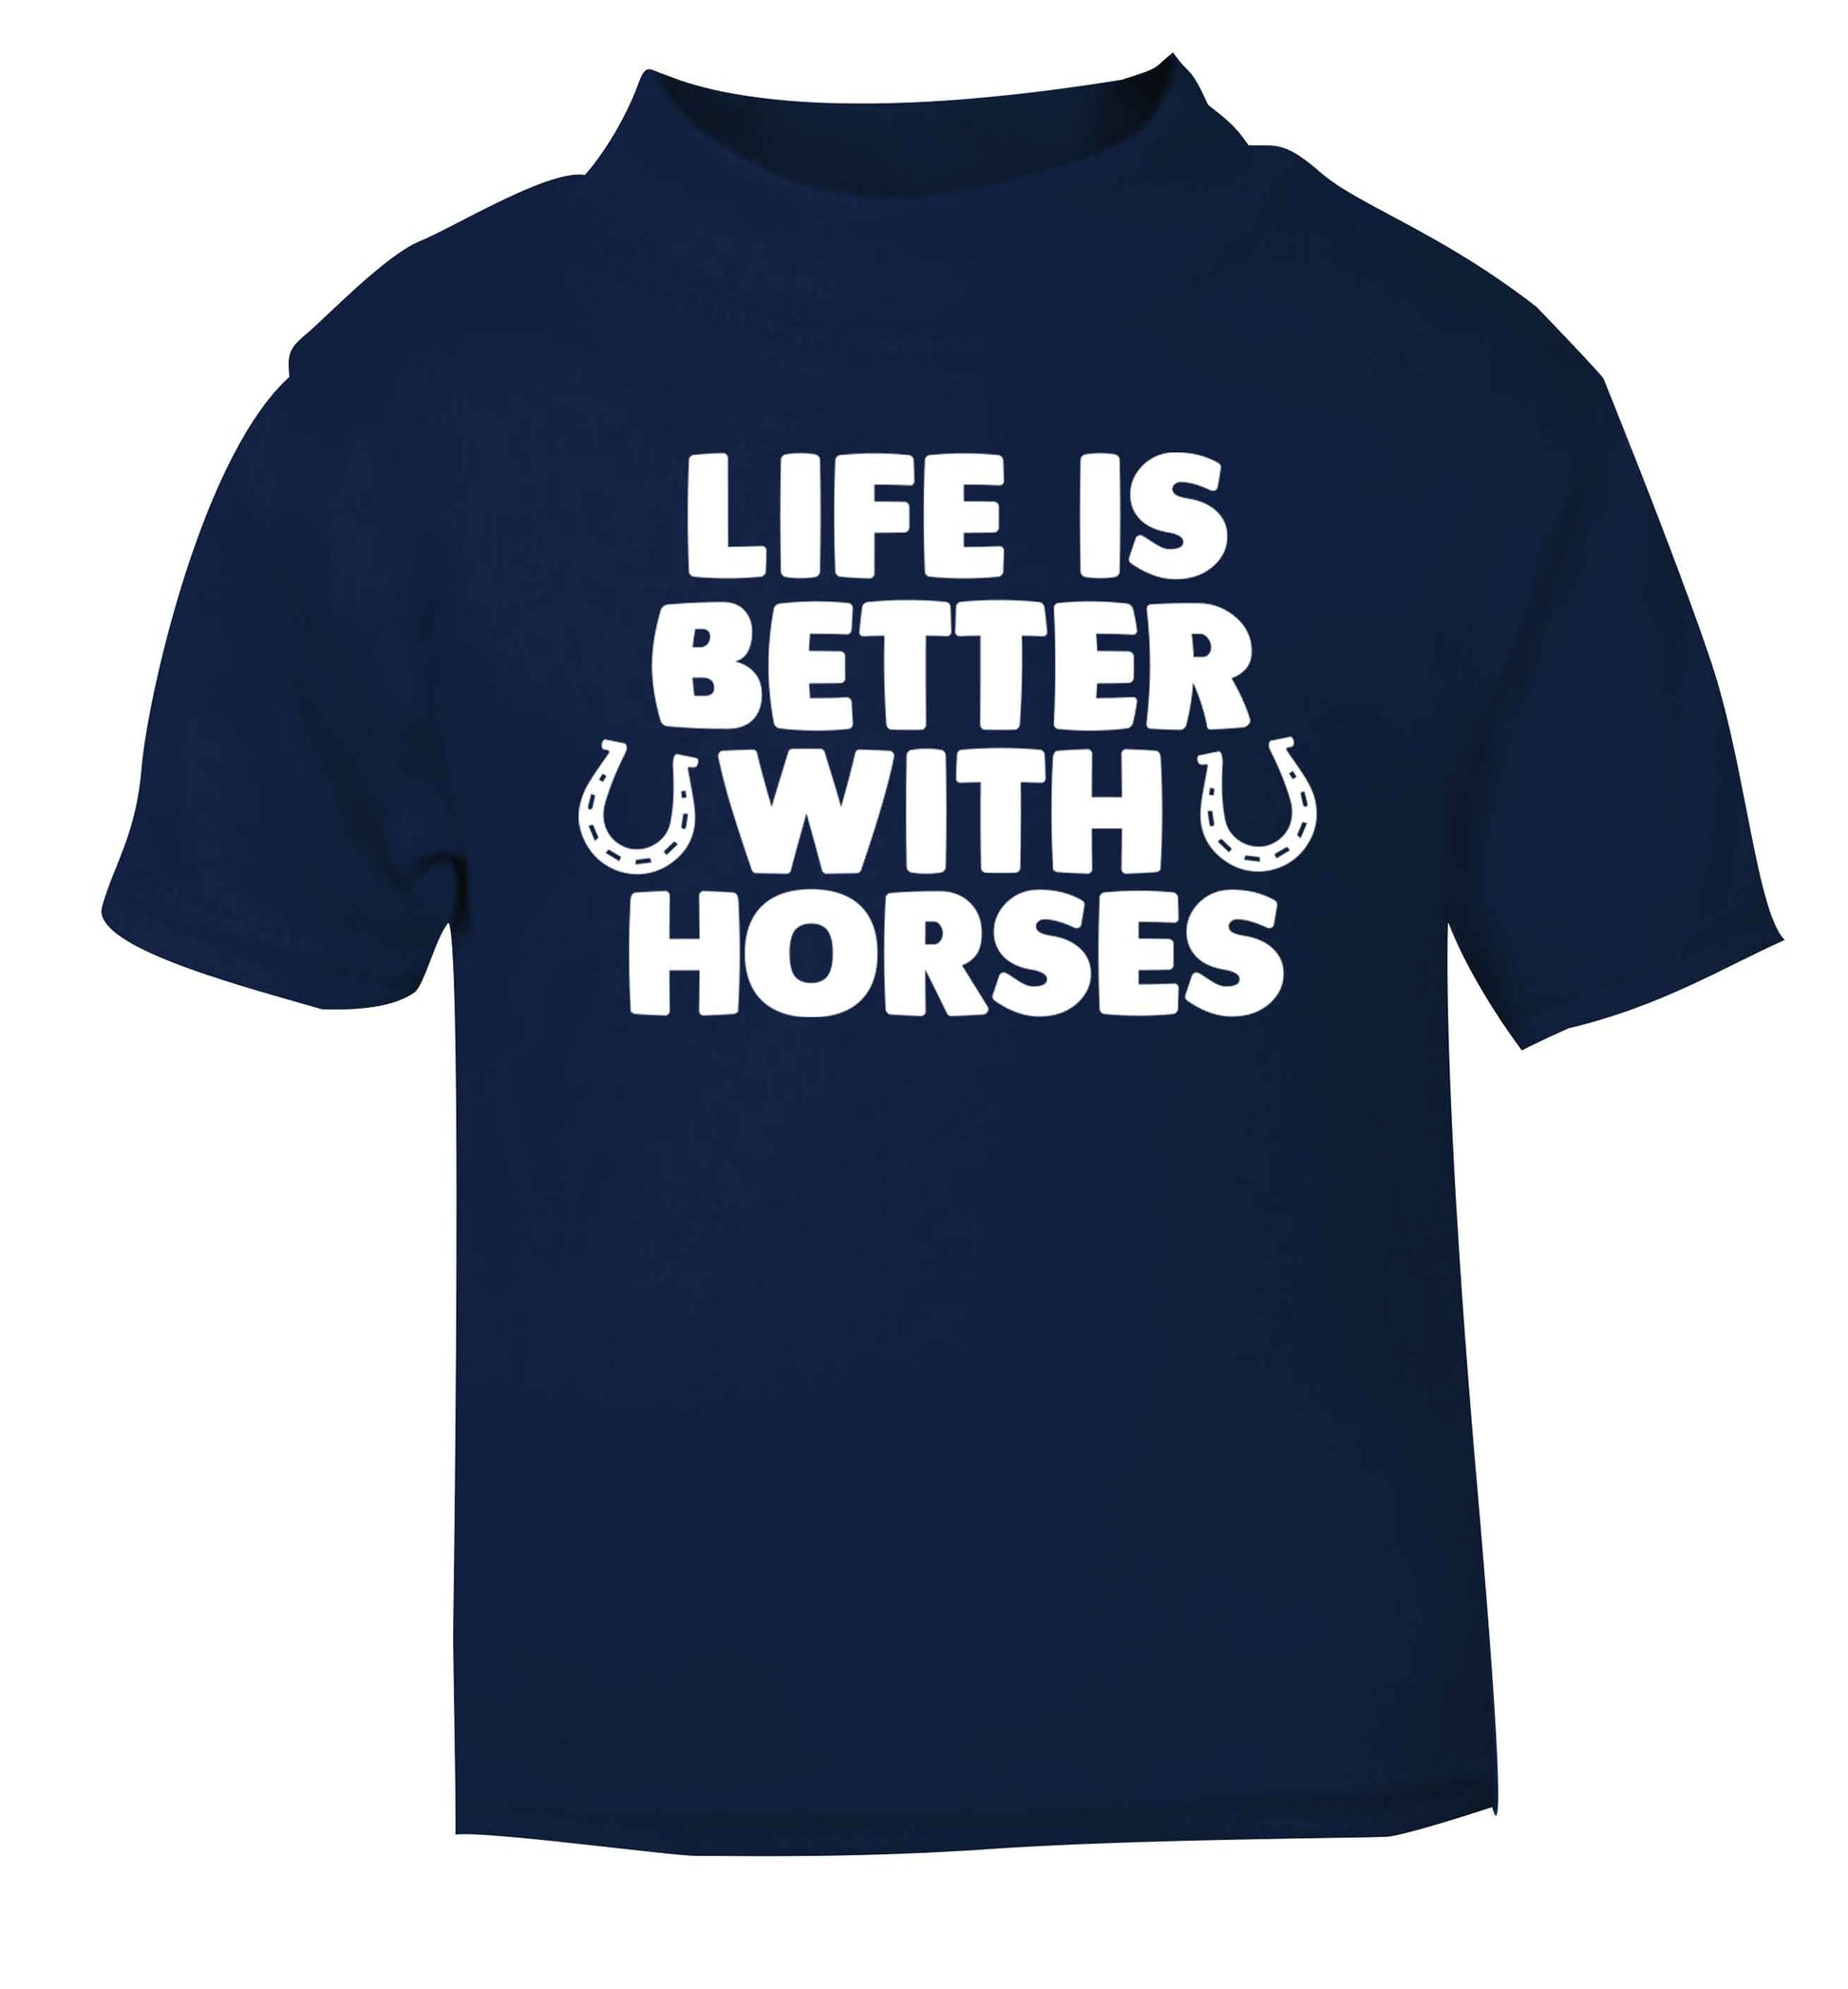 Life is better with horses navy baby toddler Tshirt 2 Years